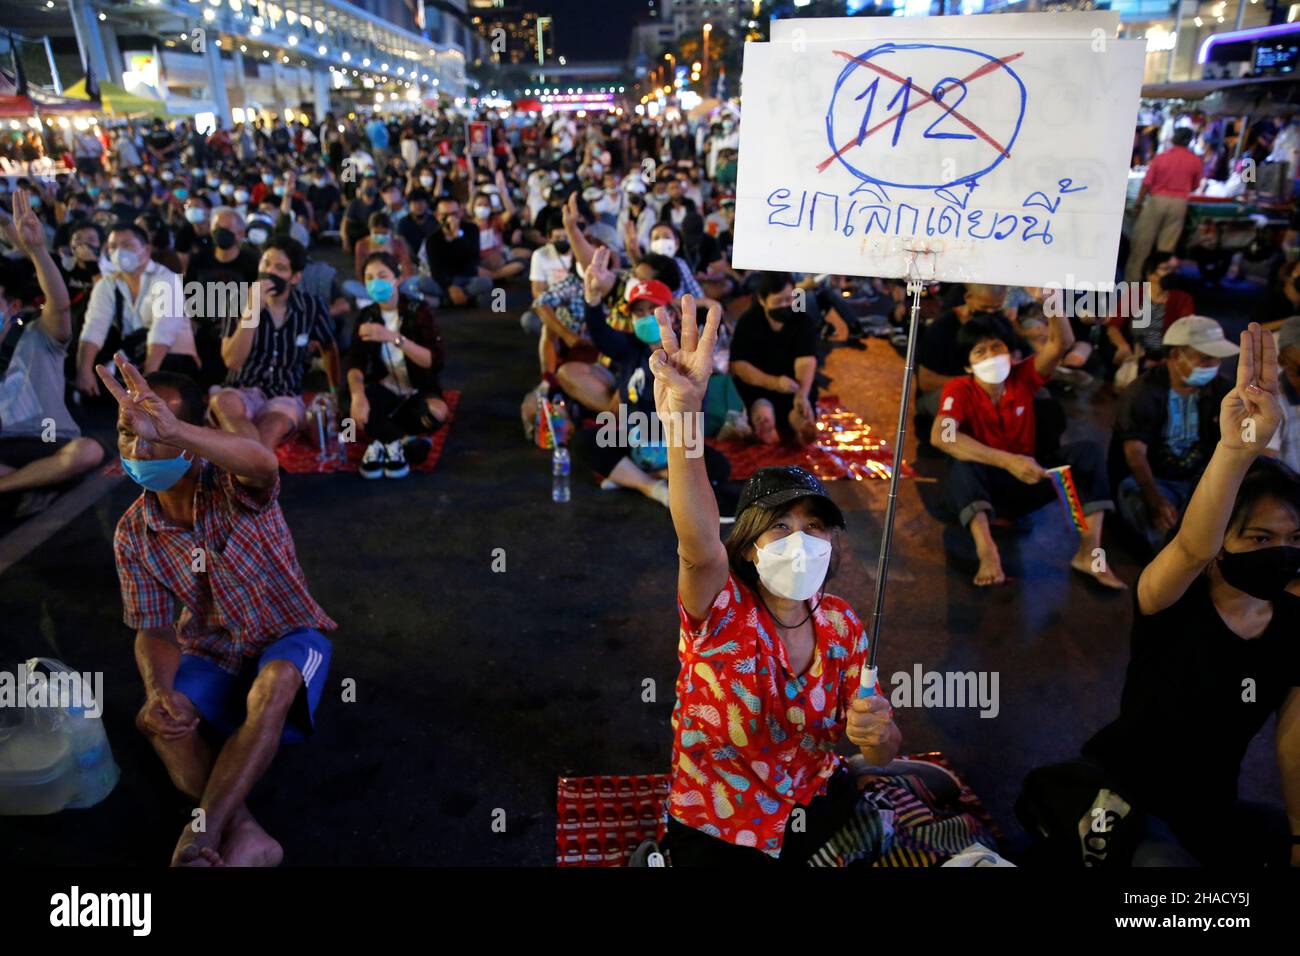 People attend a protest against Thailand's lese majeste law, in Bangkok, Thailand December 12, 2021. REUTERS/Soe Zeya Tun Stock Photo